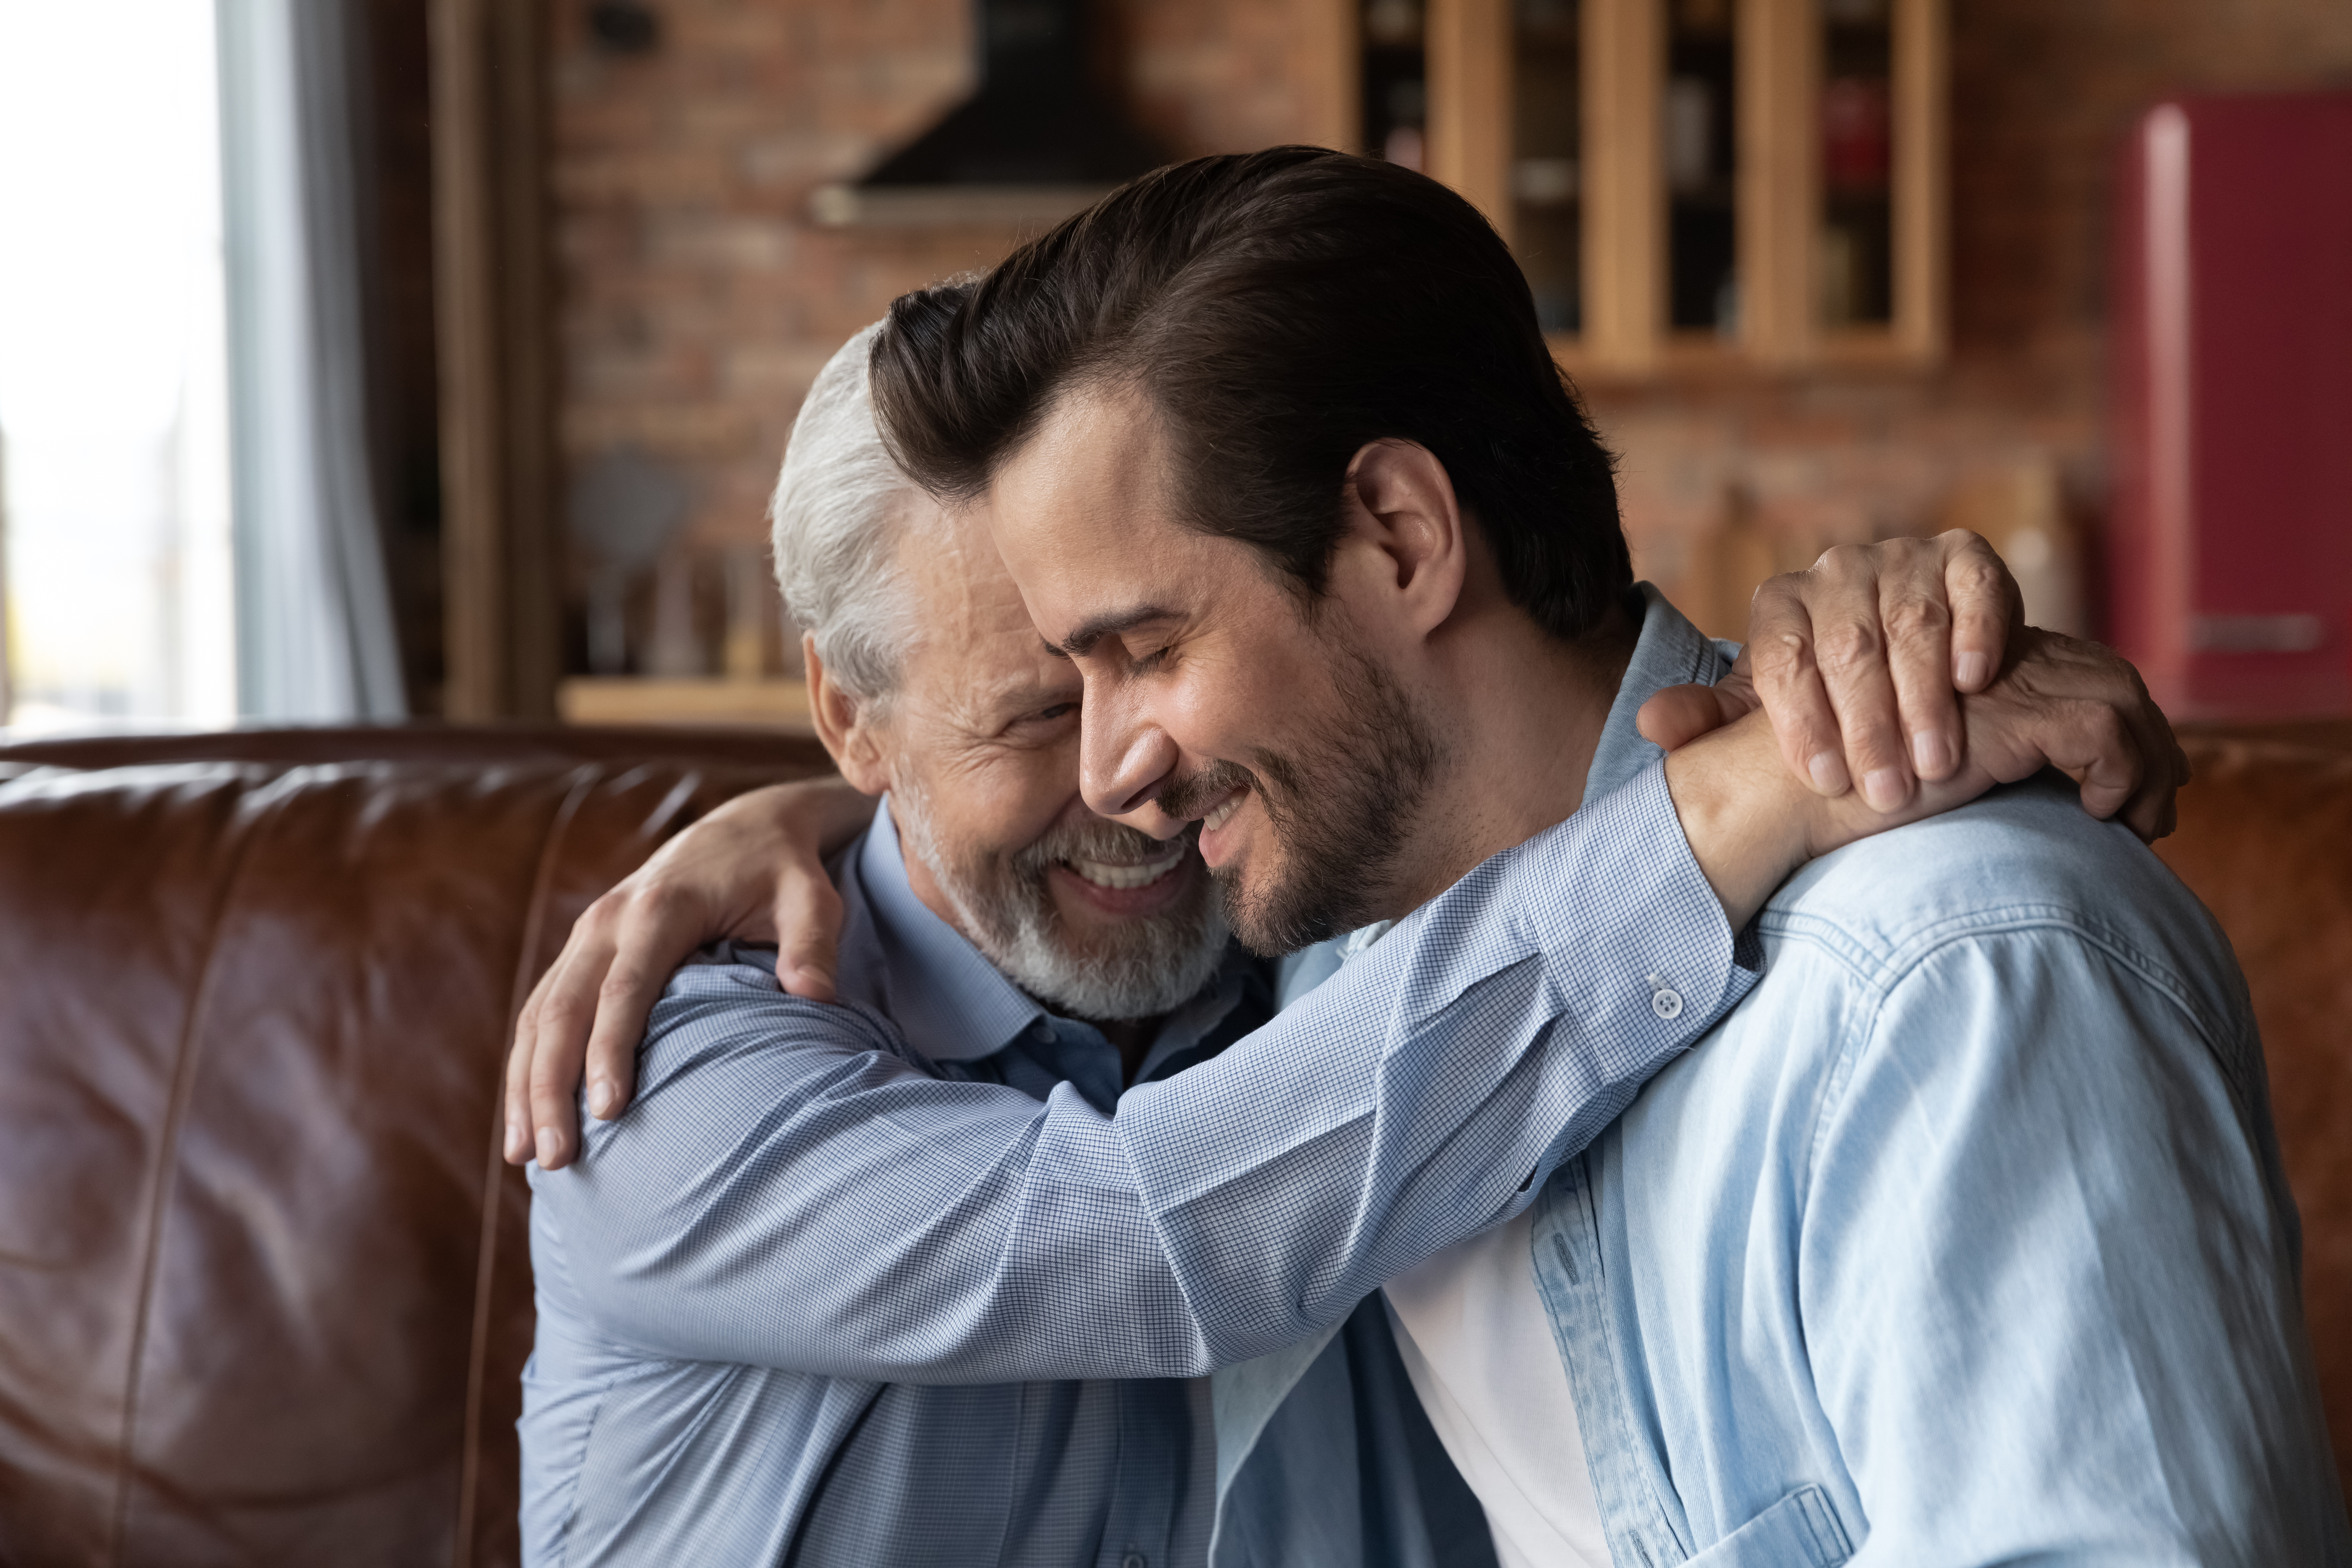 An happy older man hugging a younger one | Source: Shutterstock